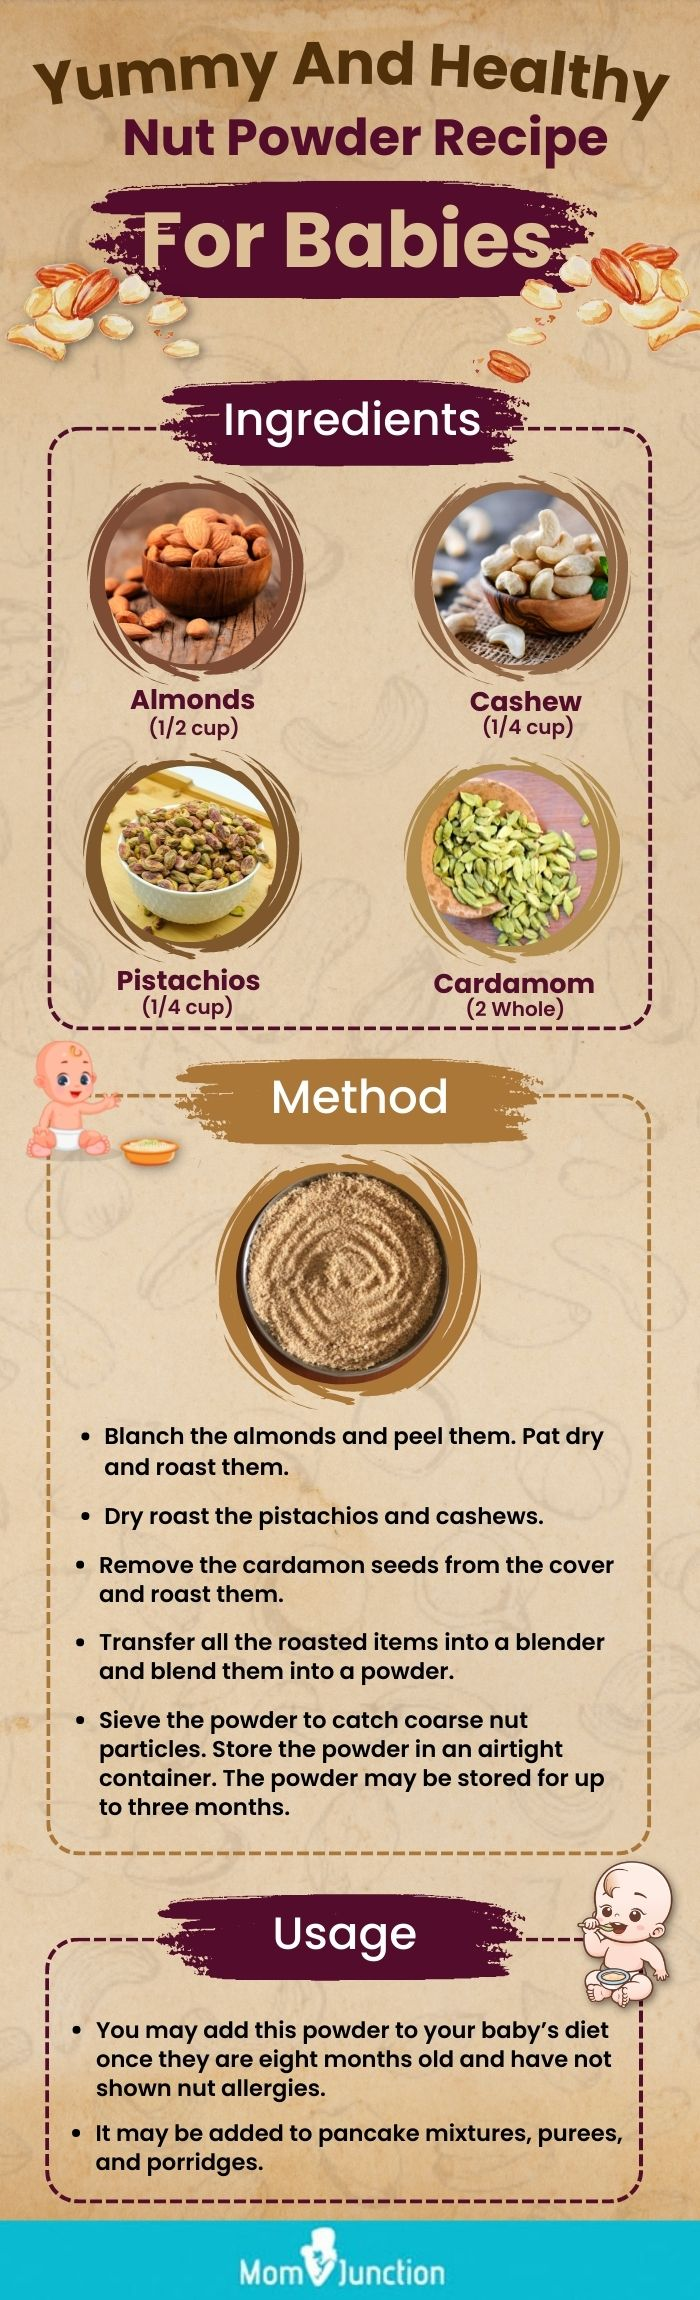 yummy and healthy nut powder recipe for babies [infographic]